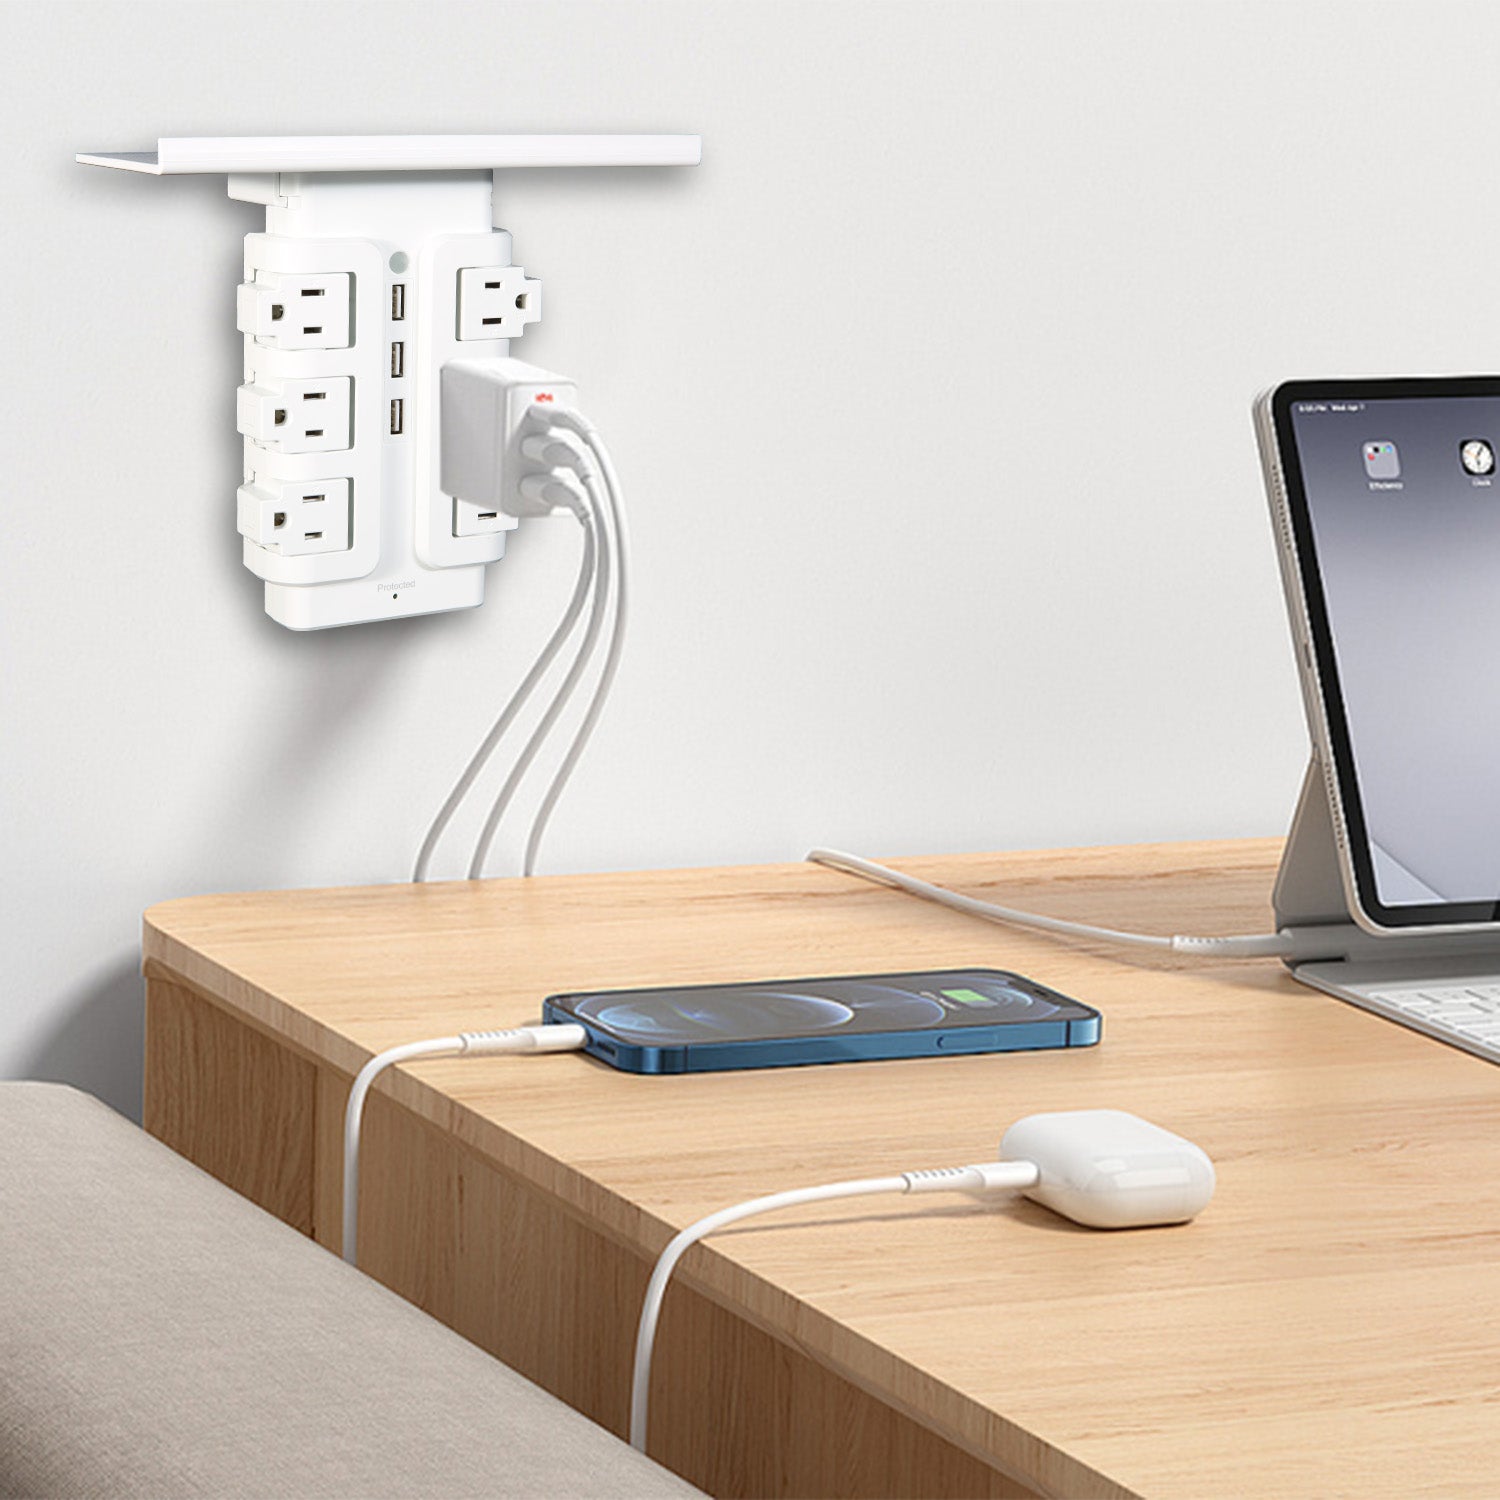 6 Outlet 3 USB Ports Rotating Power Strip with Surge Protector Wall Mount for Home Office